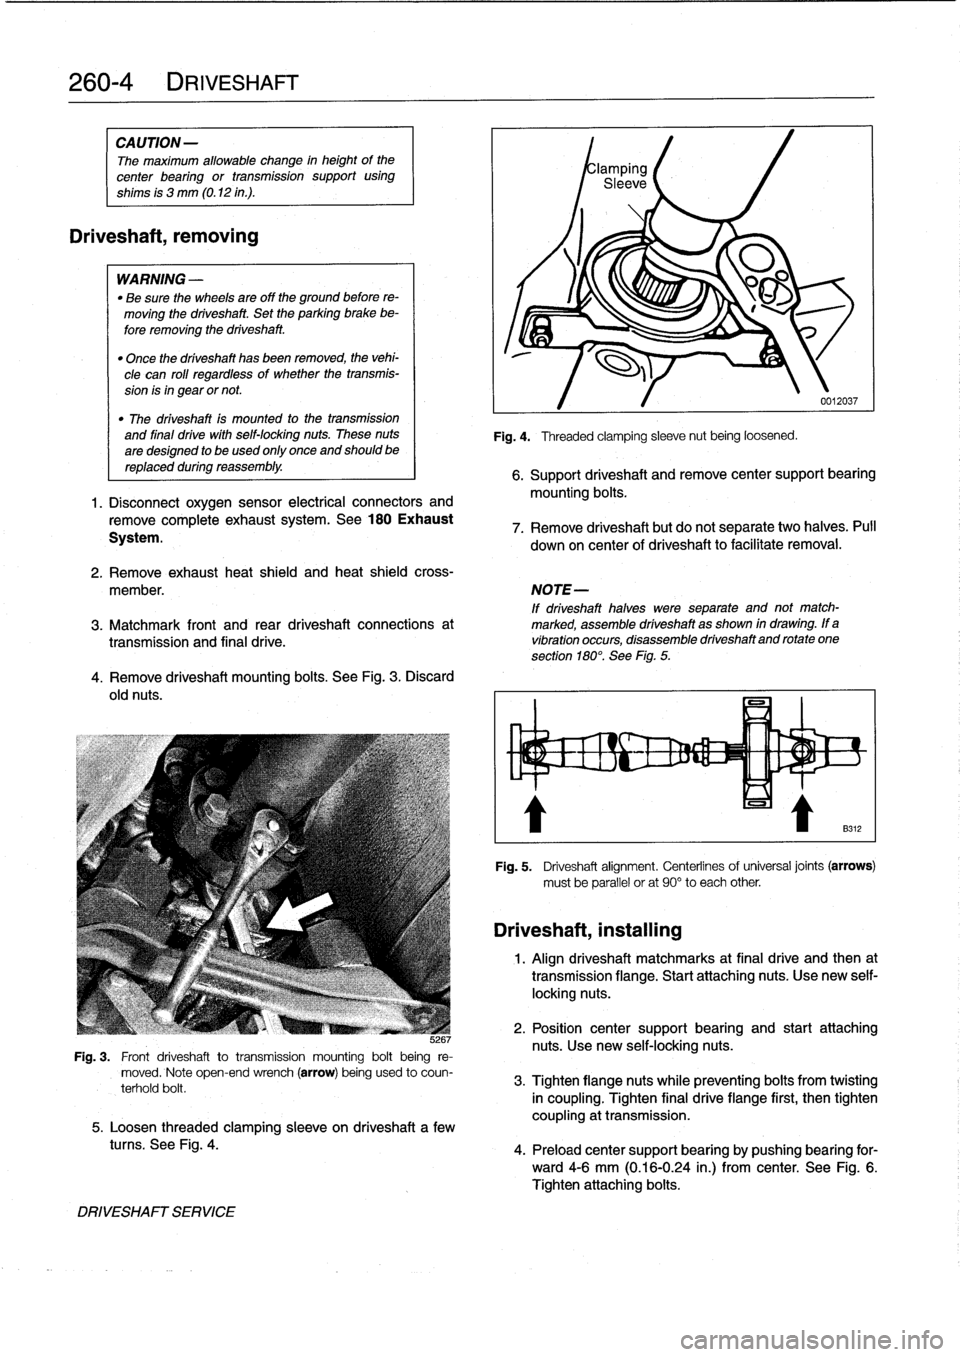 BMW 323i 1998 E36 Workshop Manual 
260-
4
DRIVESHAFT

CAUTION
-

The
maximum
allowable
change
in
height
of
the

center
bearing
or
transmission
support
using

shims
is
3
mm
(0
.12
in
.)
.

Driveshaft,
removing

WARNING
-

"
Be
sure
the